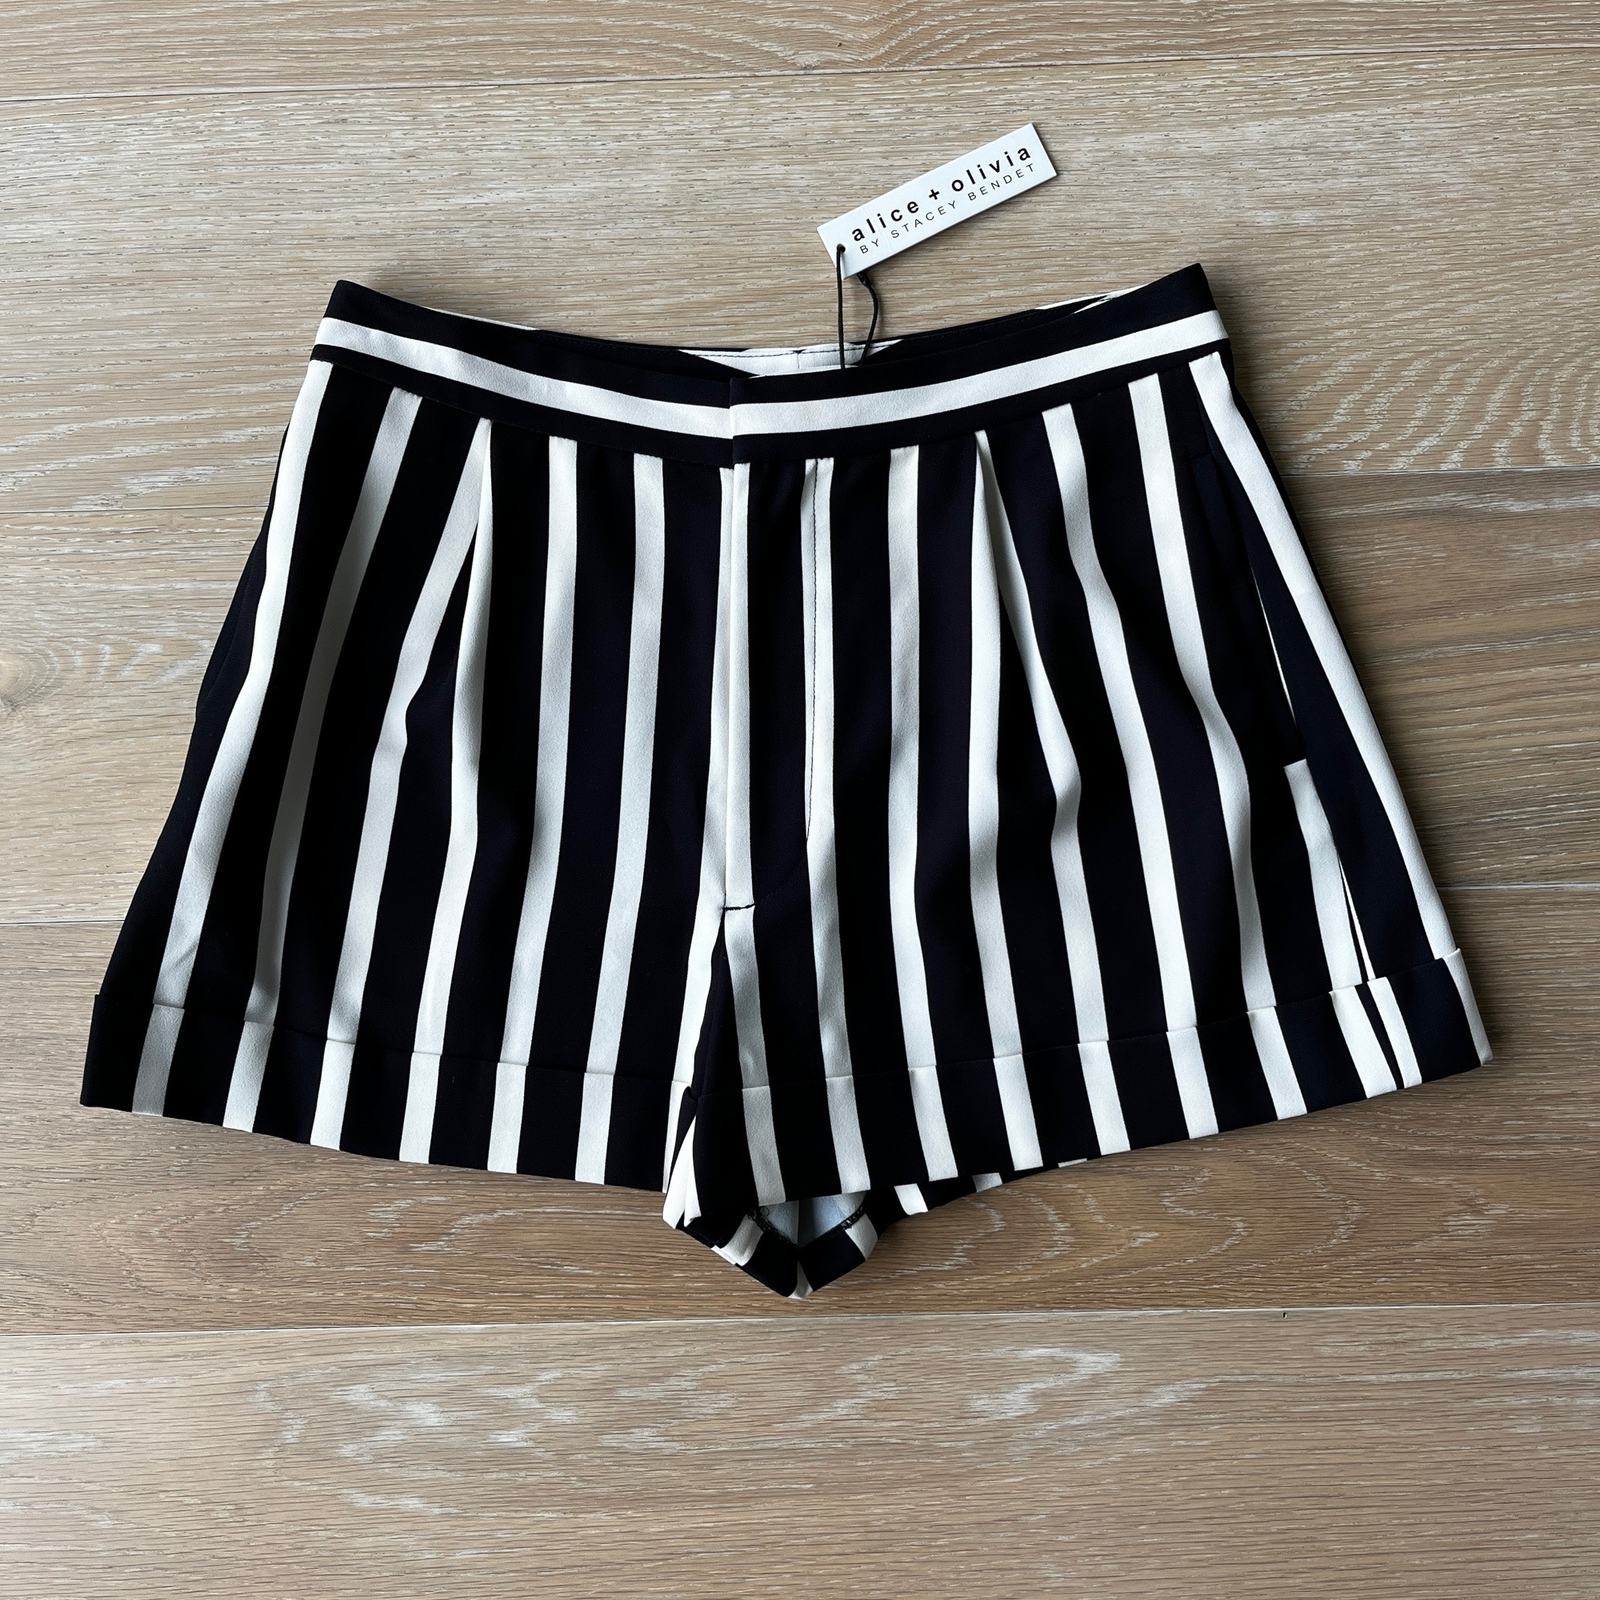 Primary image for Alice + Olivia Conry Pleated-cuff Shorts Moondust Stripe Black sz 8 NWT